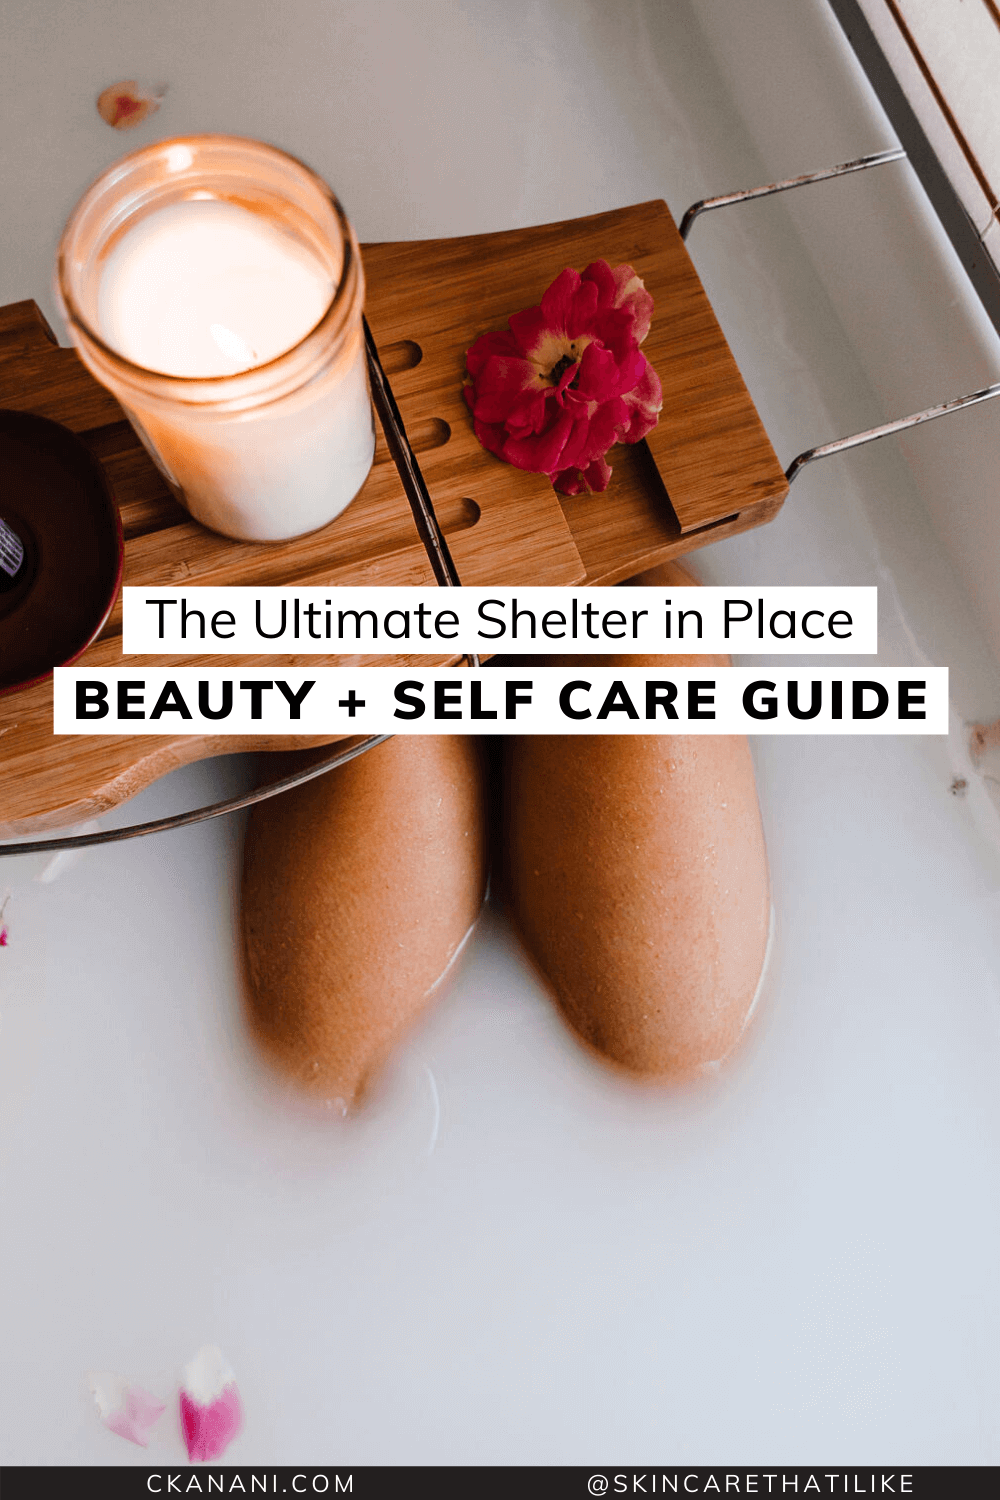 The ultimate shelter in place beauty and self care guide. Everything you need to thrive while staying at home! #stayhome #beauty #ltkbeauty #skincare #shelterinplace #stayhome